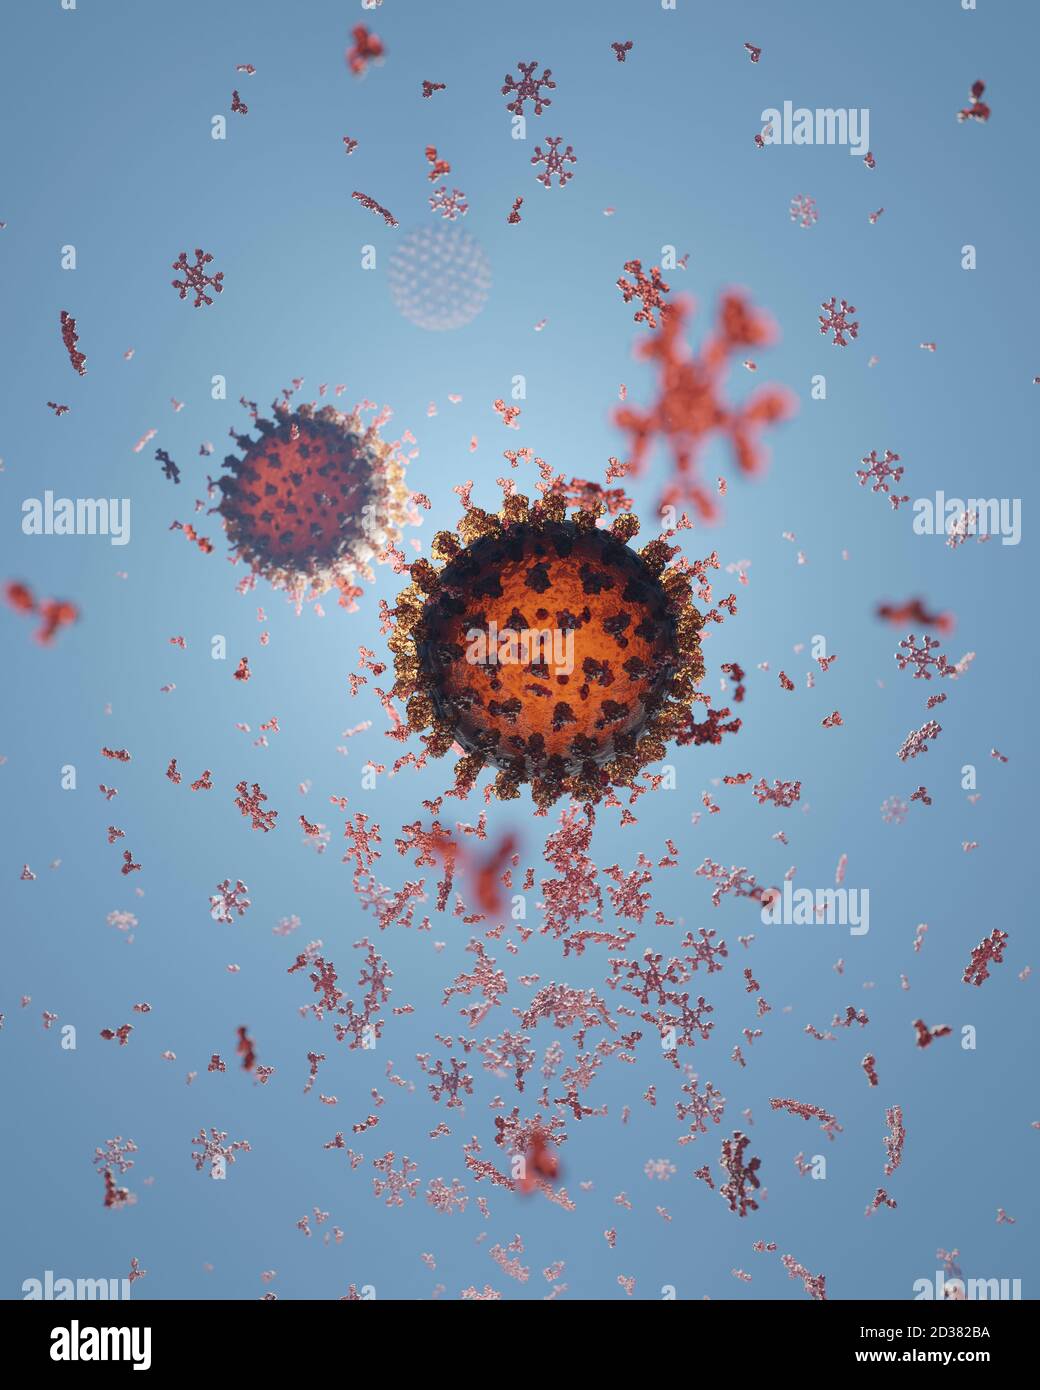 Cluster of human antibodies (igG and igM) attacking a Corona virus (Covid 19). An accurate model based on scientific structural data from the PDB. Stock Photo